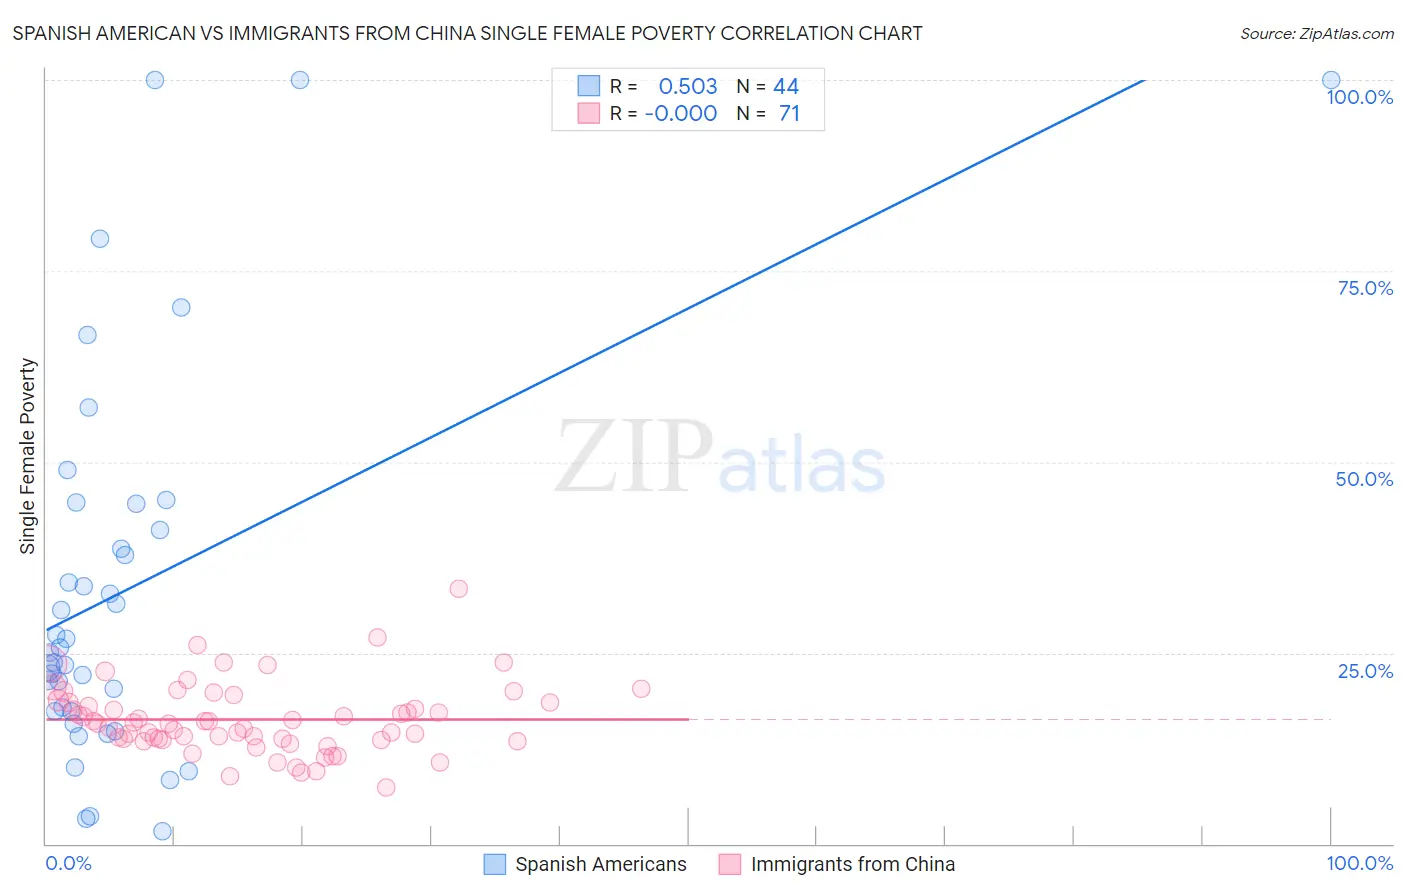 Spanish American vs Immigrants from China Single Female Poverty